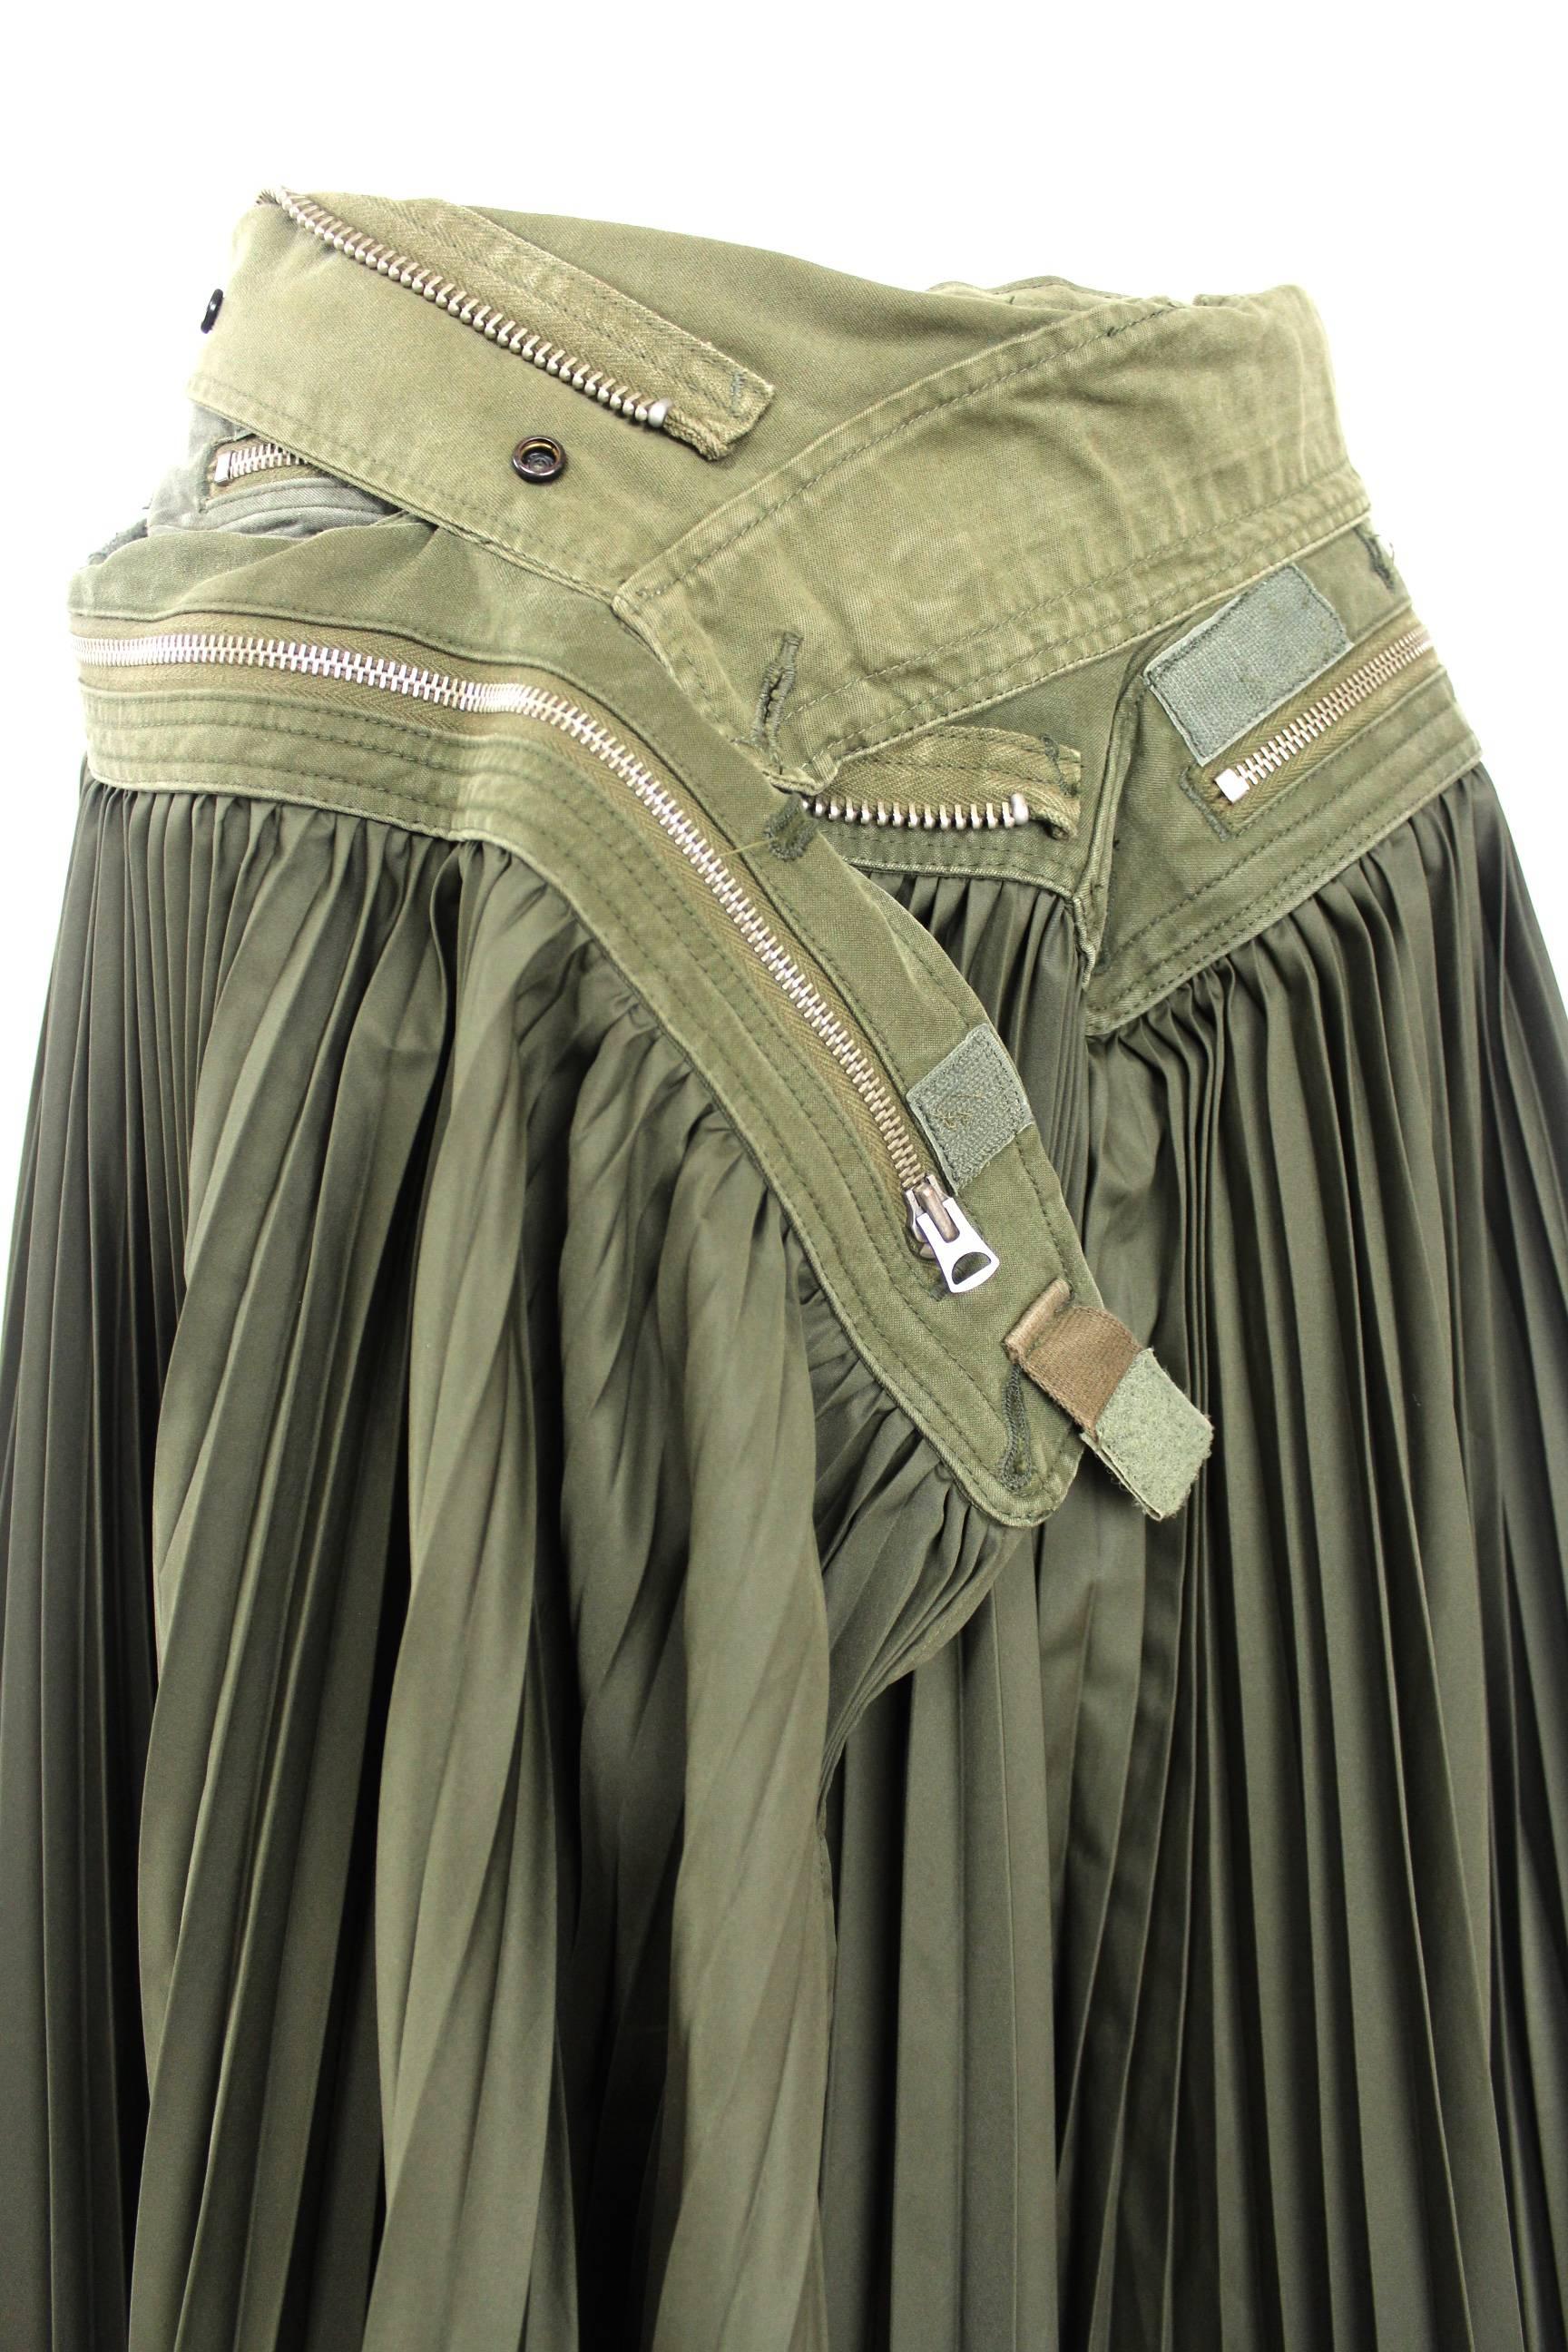 Junya Watanabe 2006 Collection Runway Pleated Military Skirt
Labelled size SS
Excellent Condition